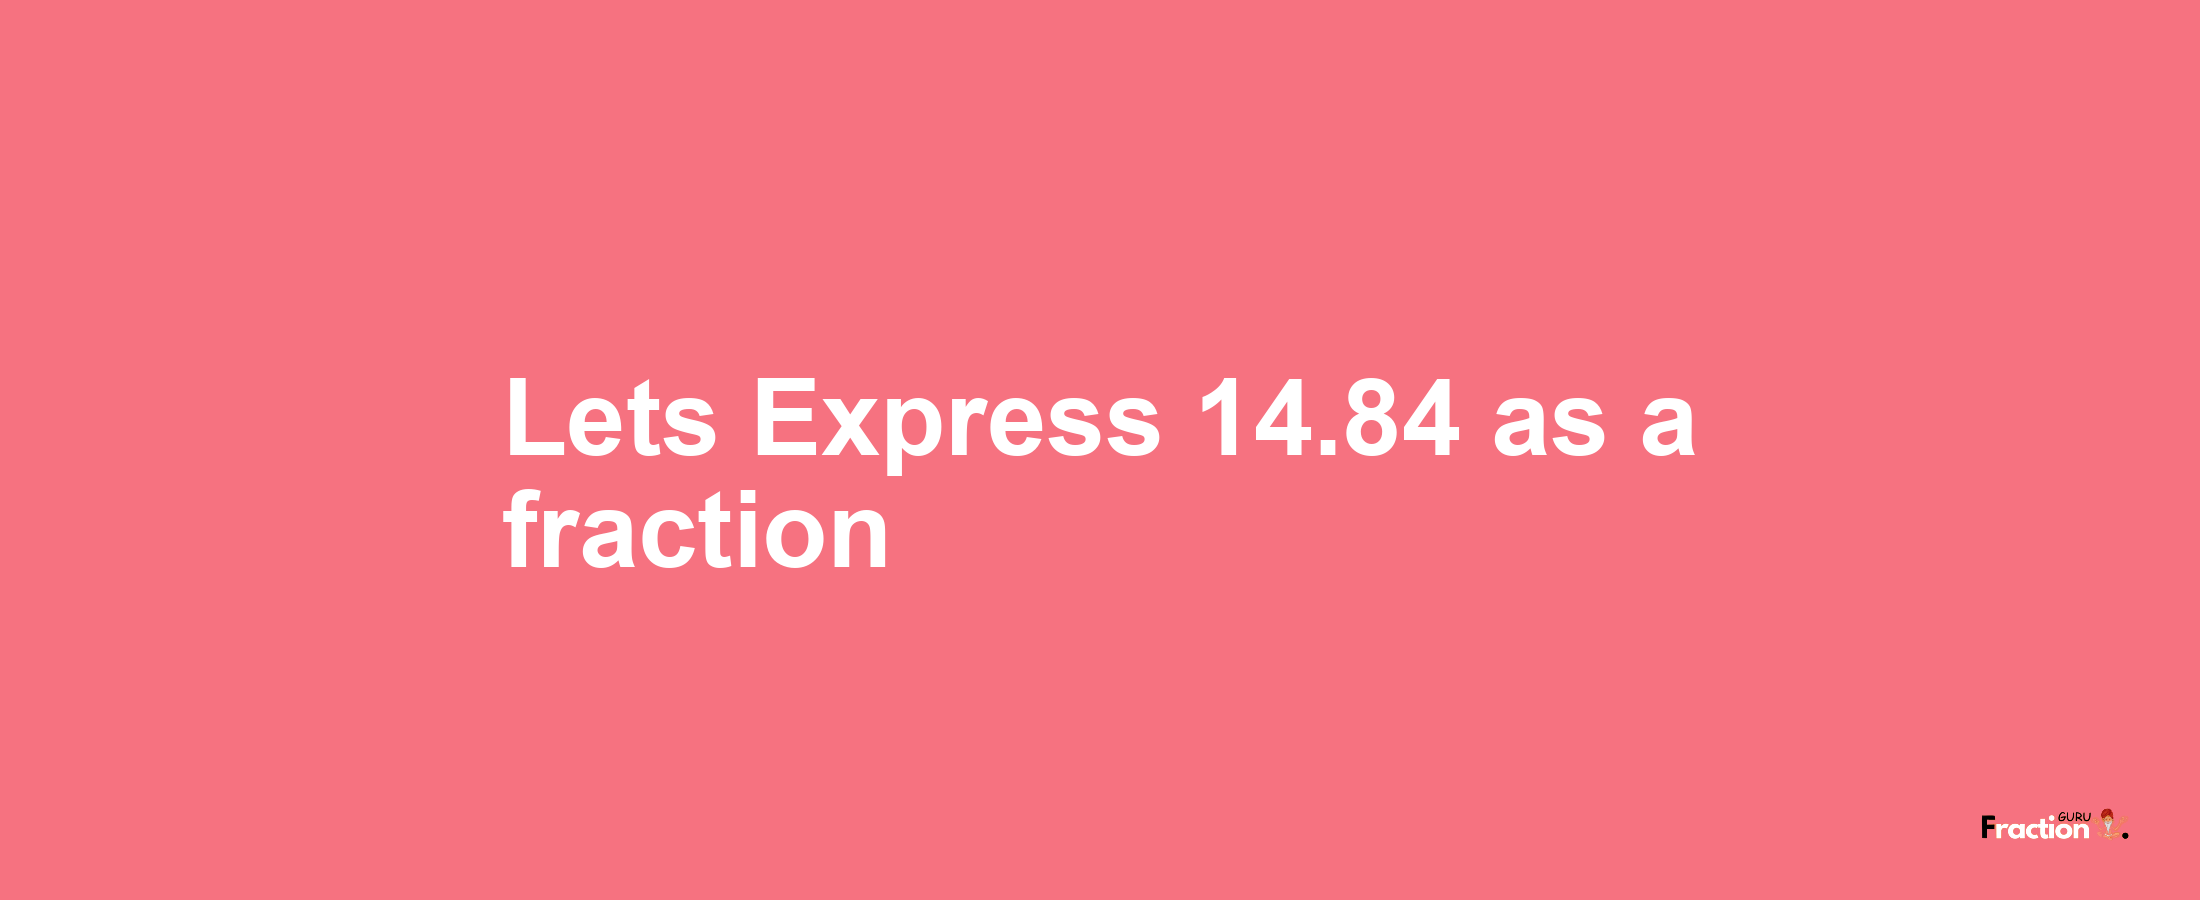 Lets Express 14.84 as afraction